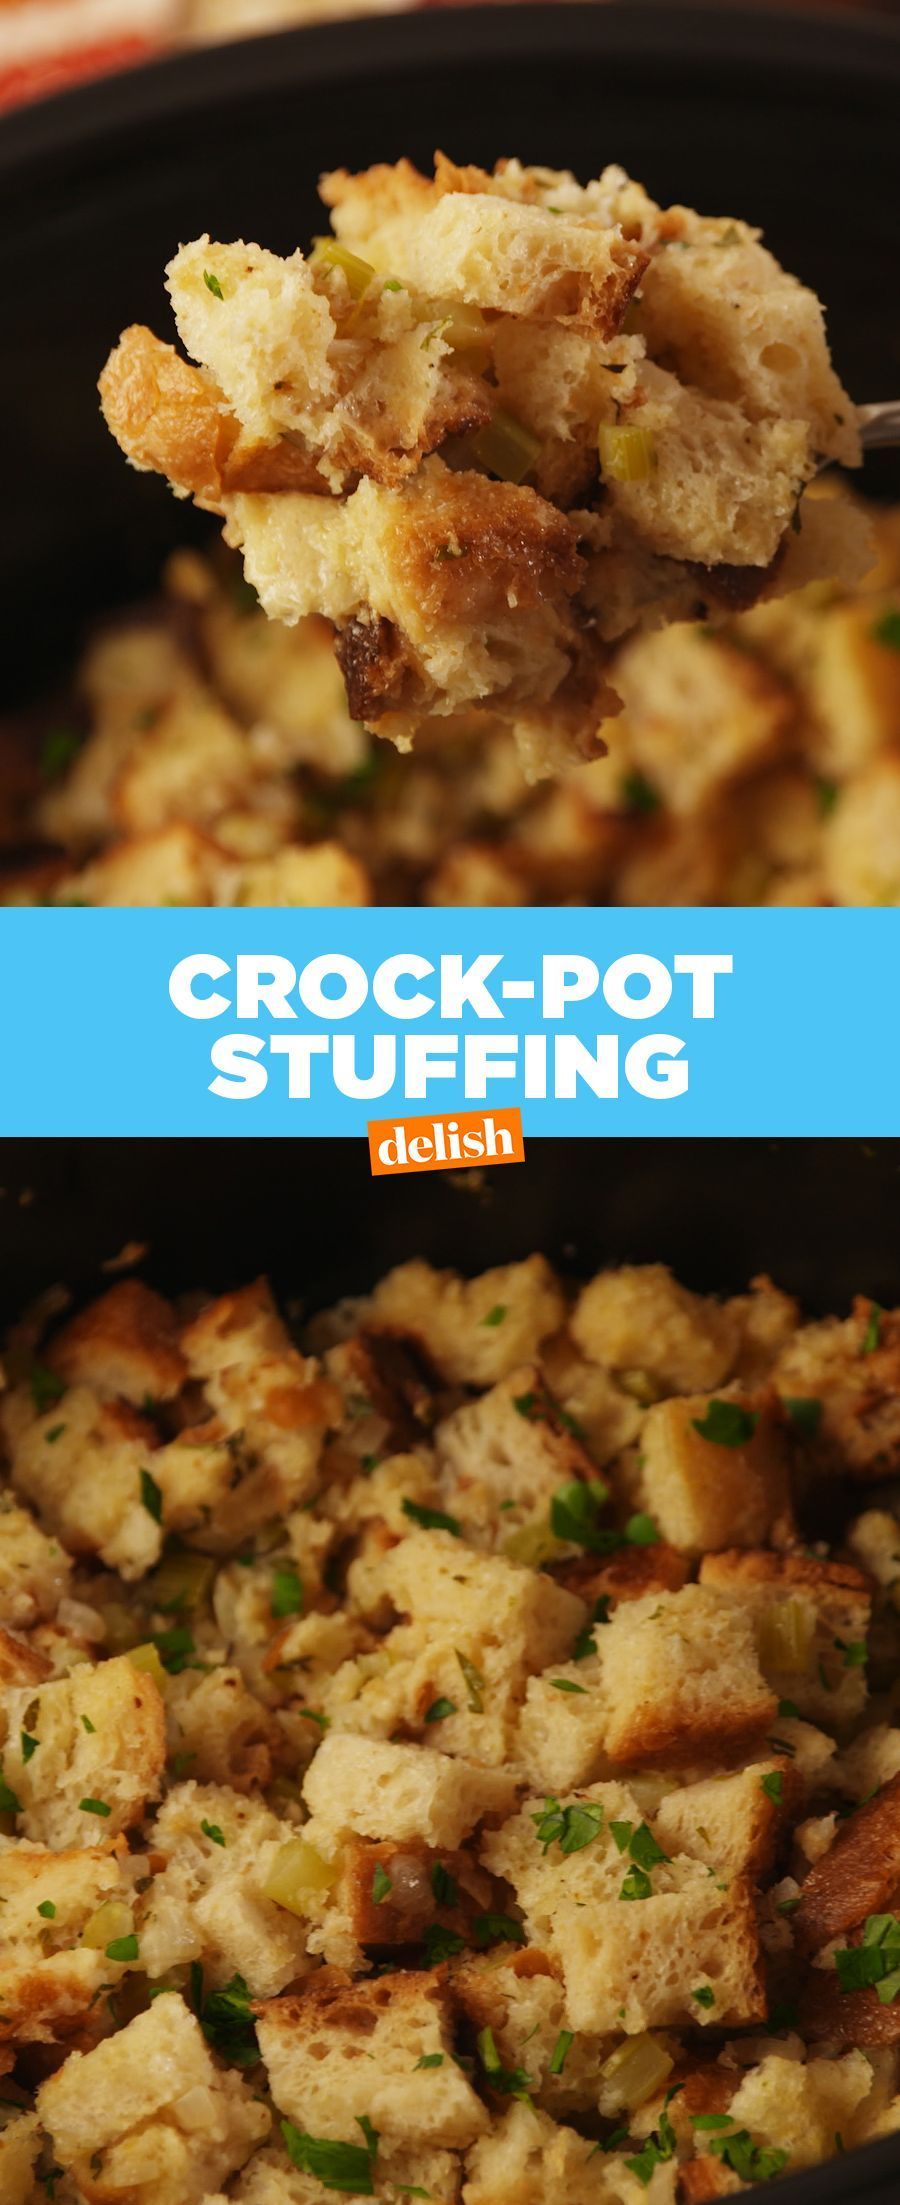 Save Oven Space And Make This Insanely Good Crock-Pot Stuffing -   17 dressing recipes thanksgiving crock pot ideas